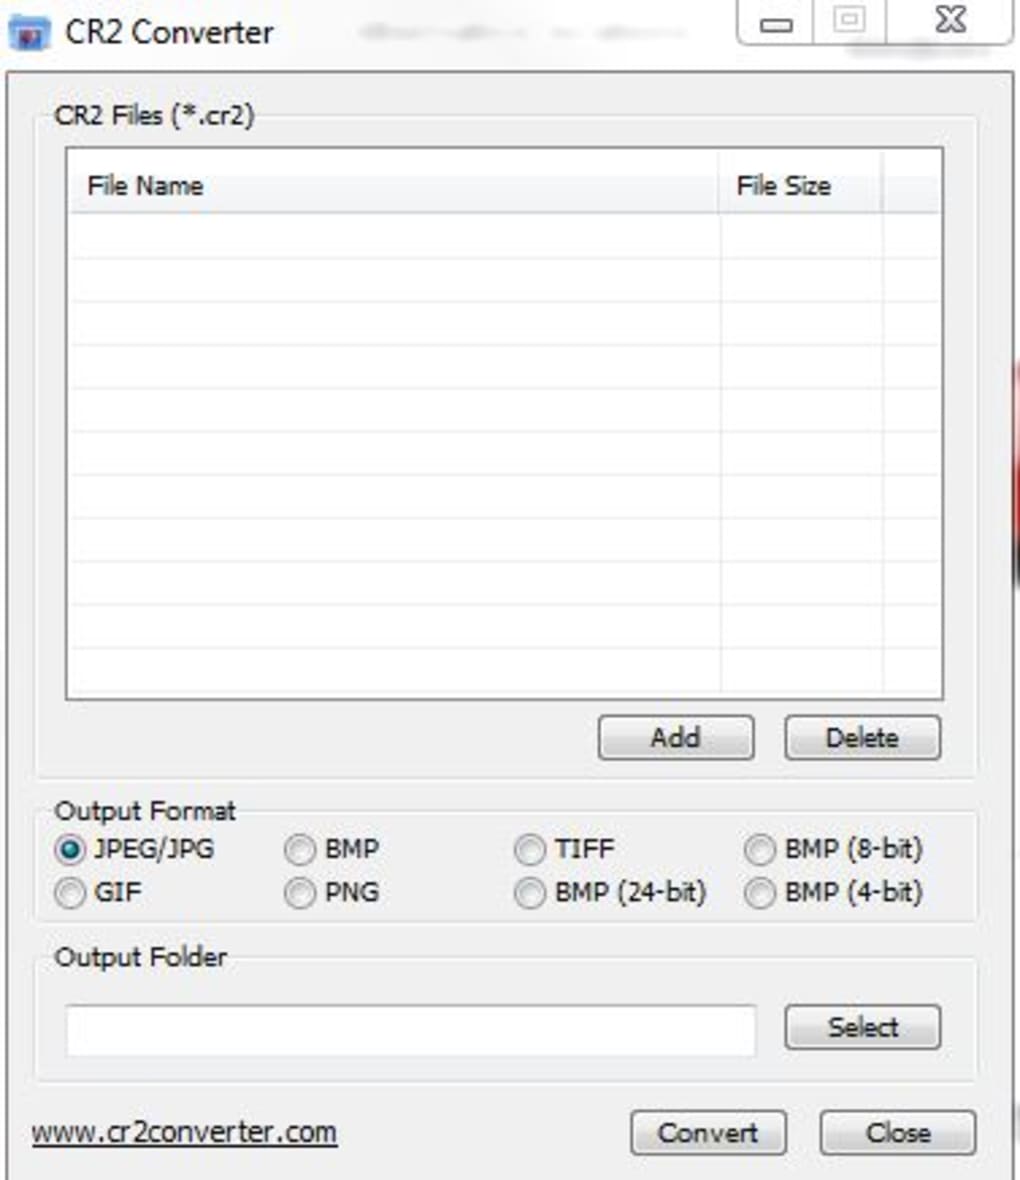 cr2 to jpg converter free download for windows 10